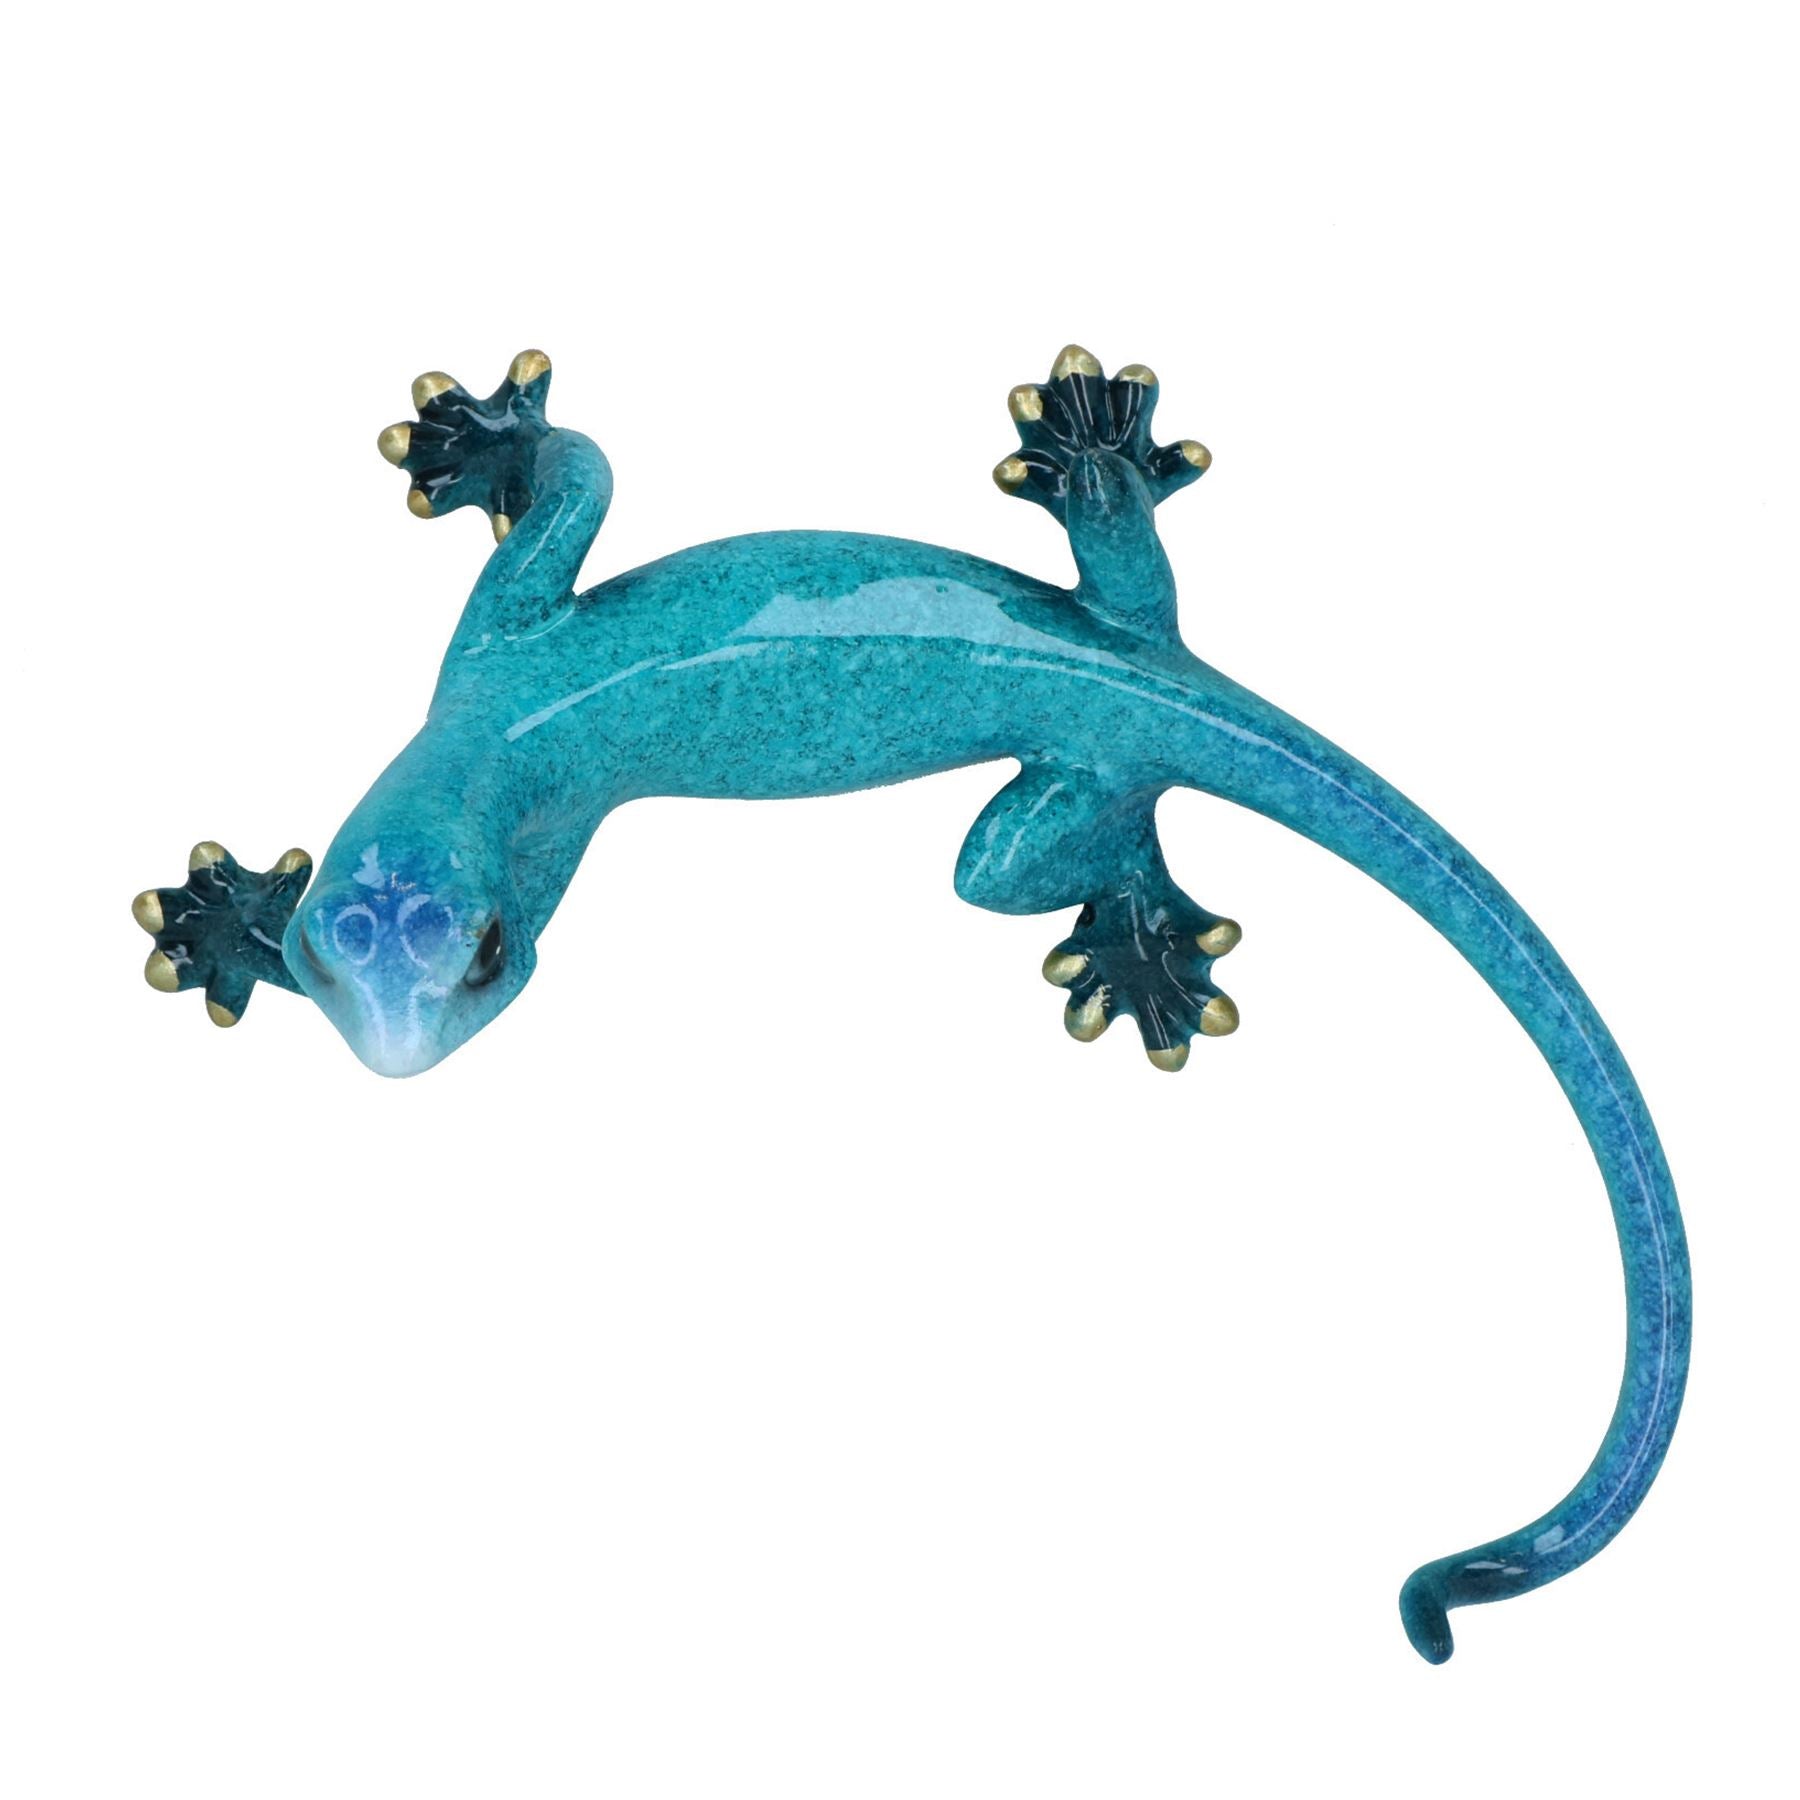 Blue Speckled Gecko Lizard Resin Wall Shed Sculpture Decor Statue Small House